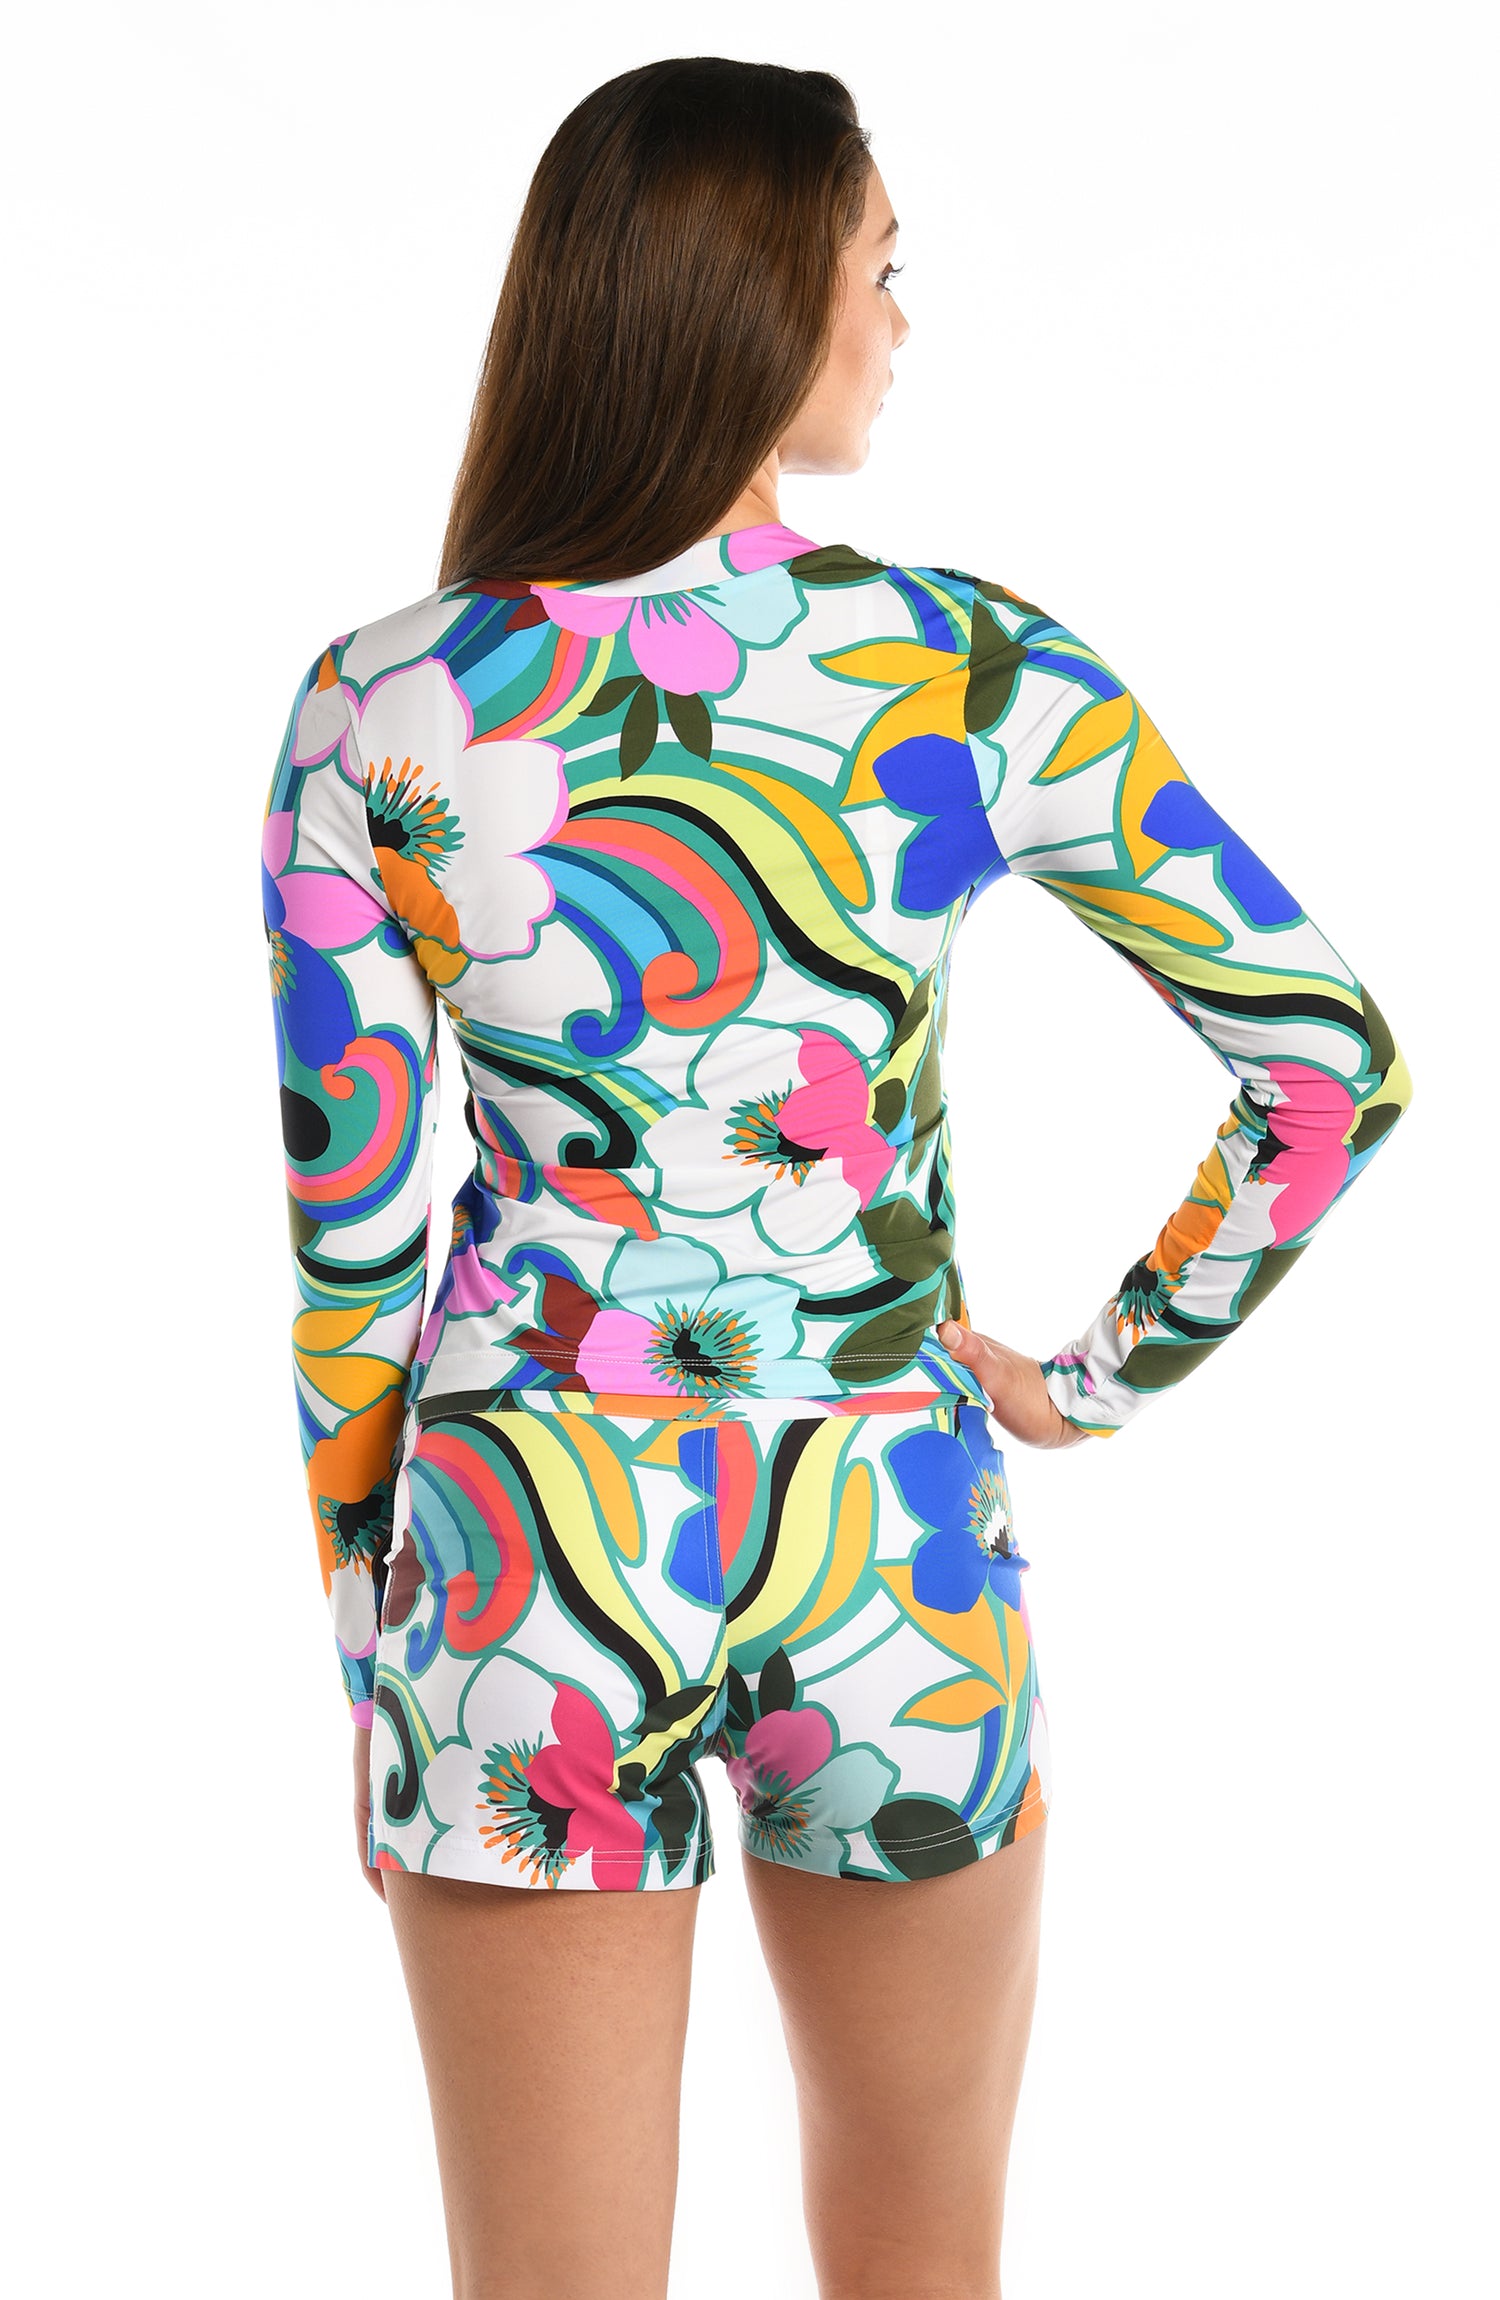 Model is wearing a multicolored bold floral printed half zip rashguard top from our Sun Catcher collection. 